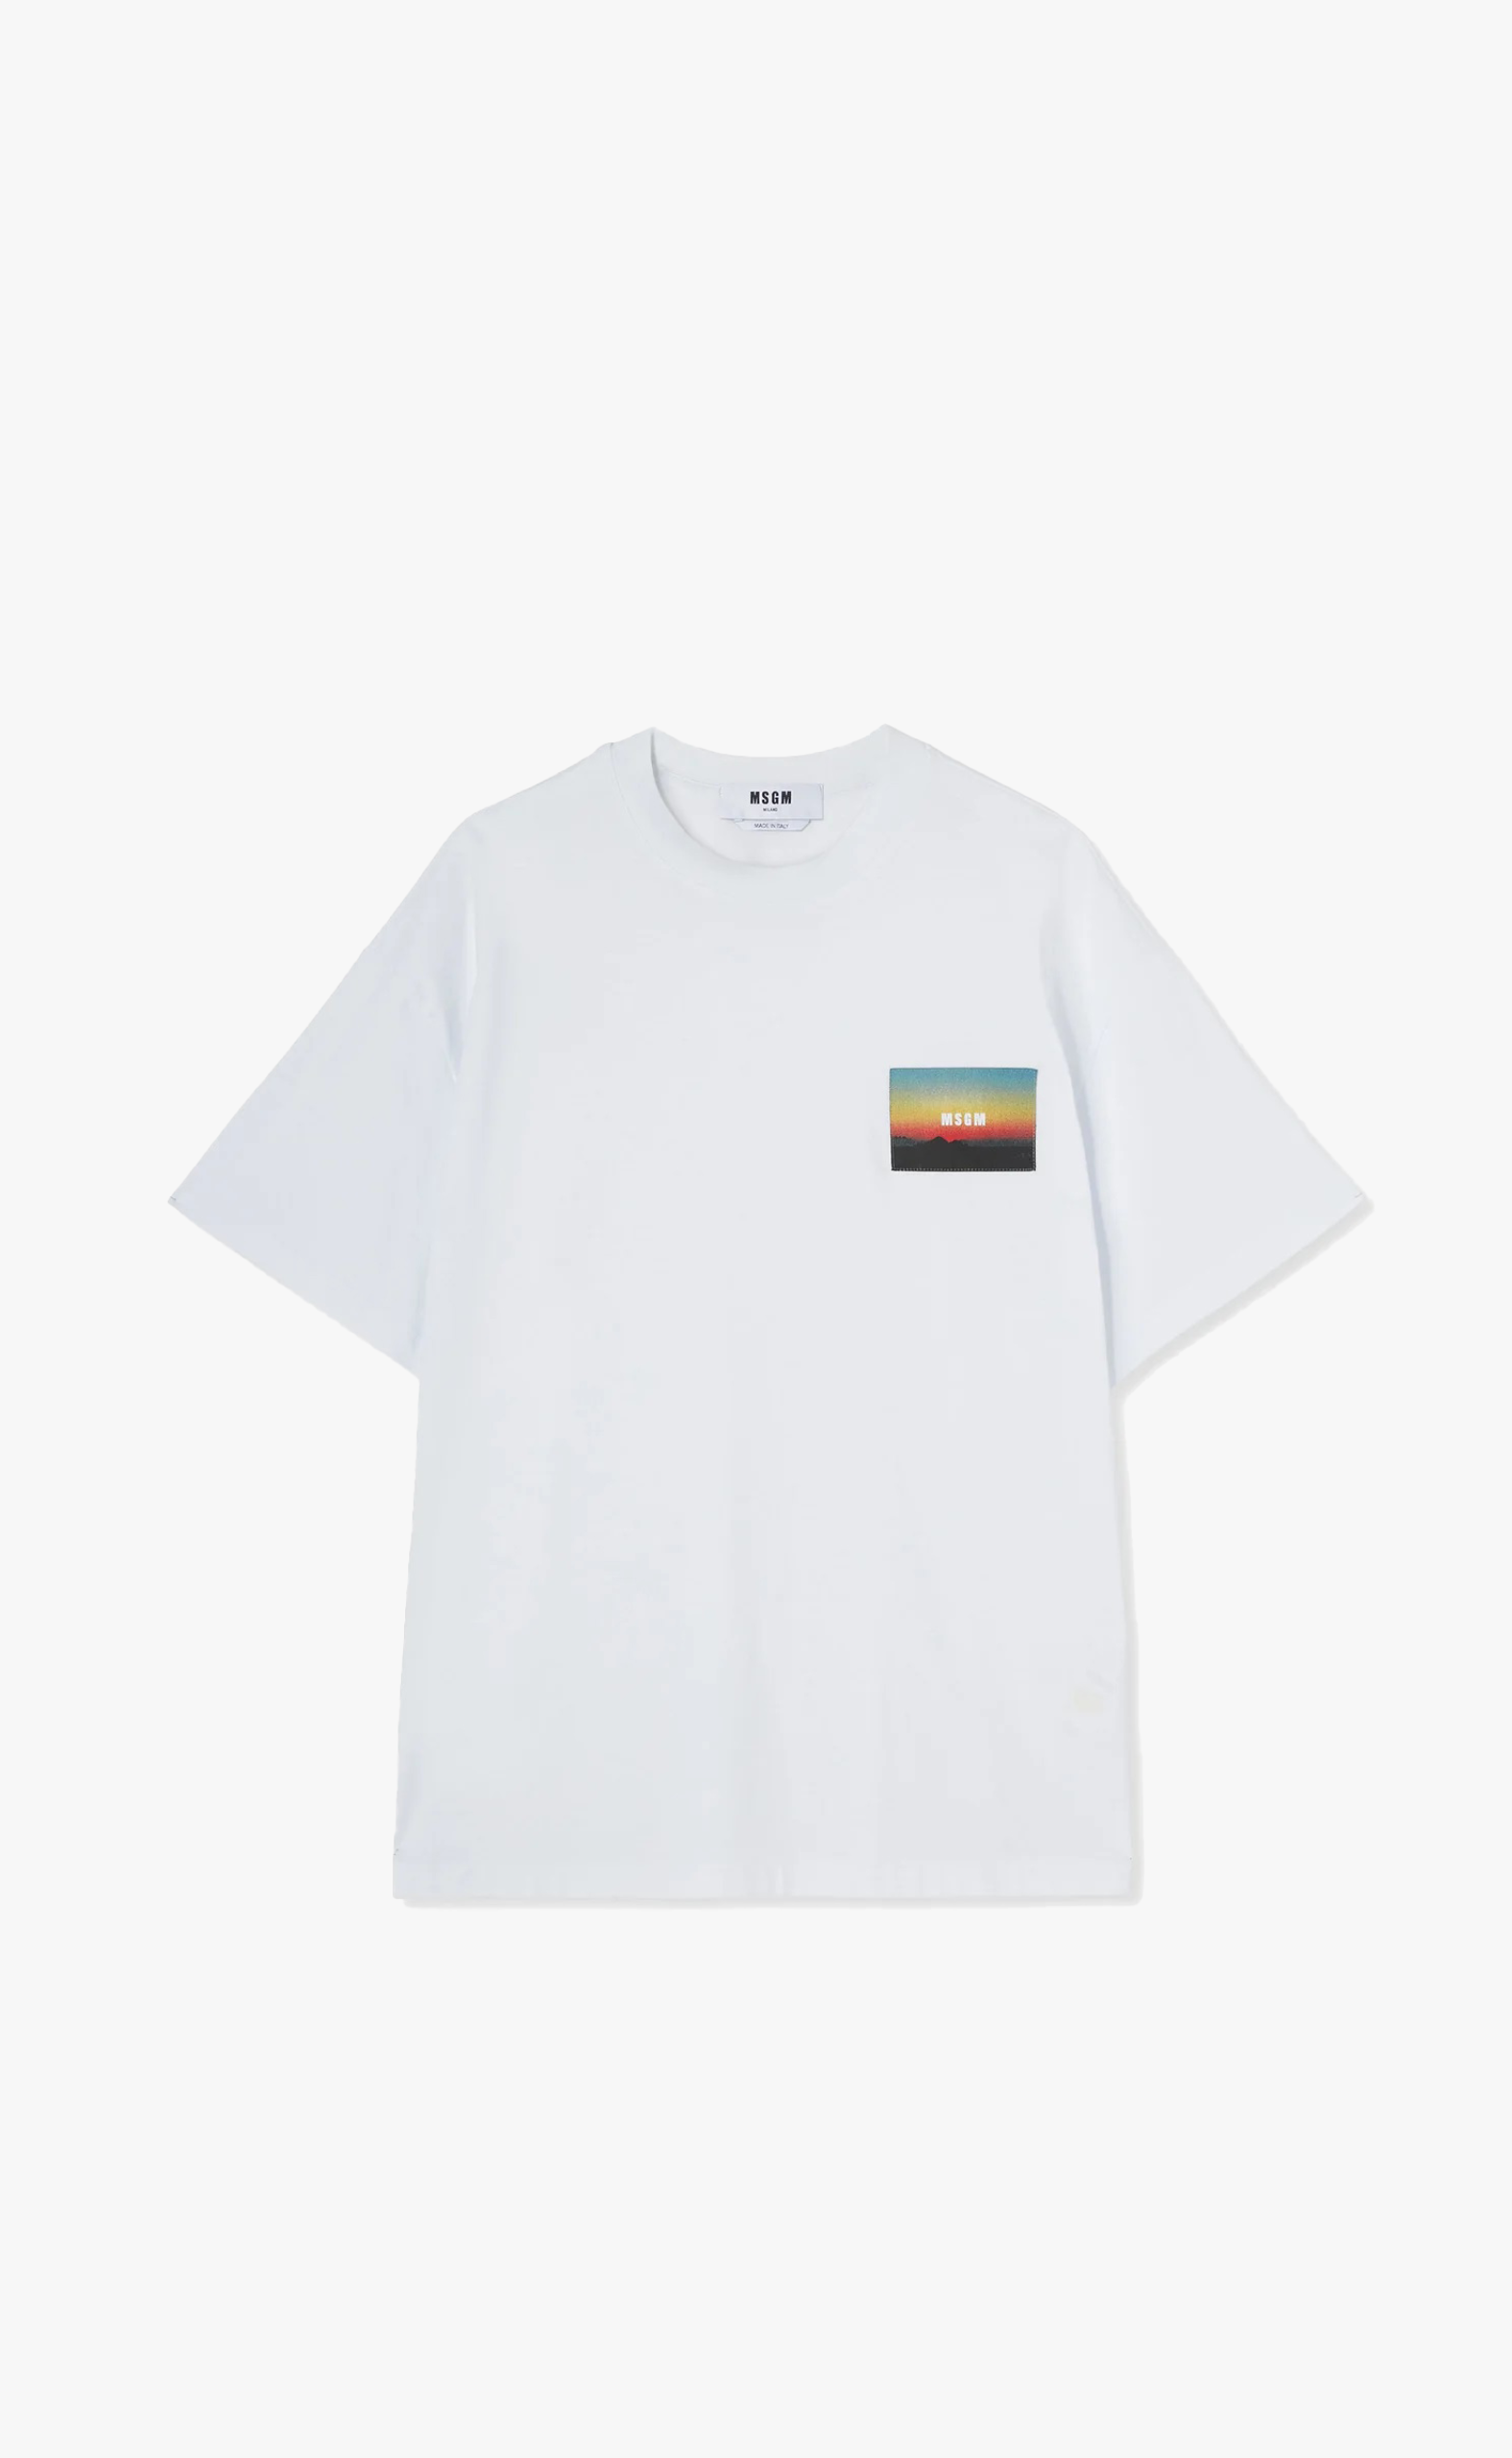 T-SHIRT WITH APPLIED SUNSET PATCH OPTICAL WHITE T-SHIRT